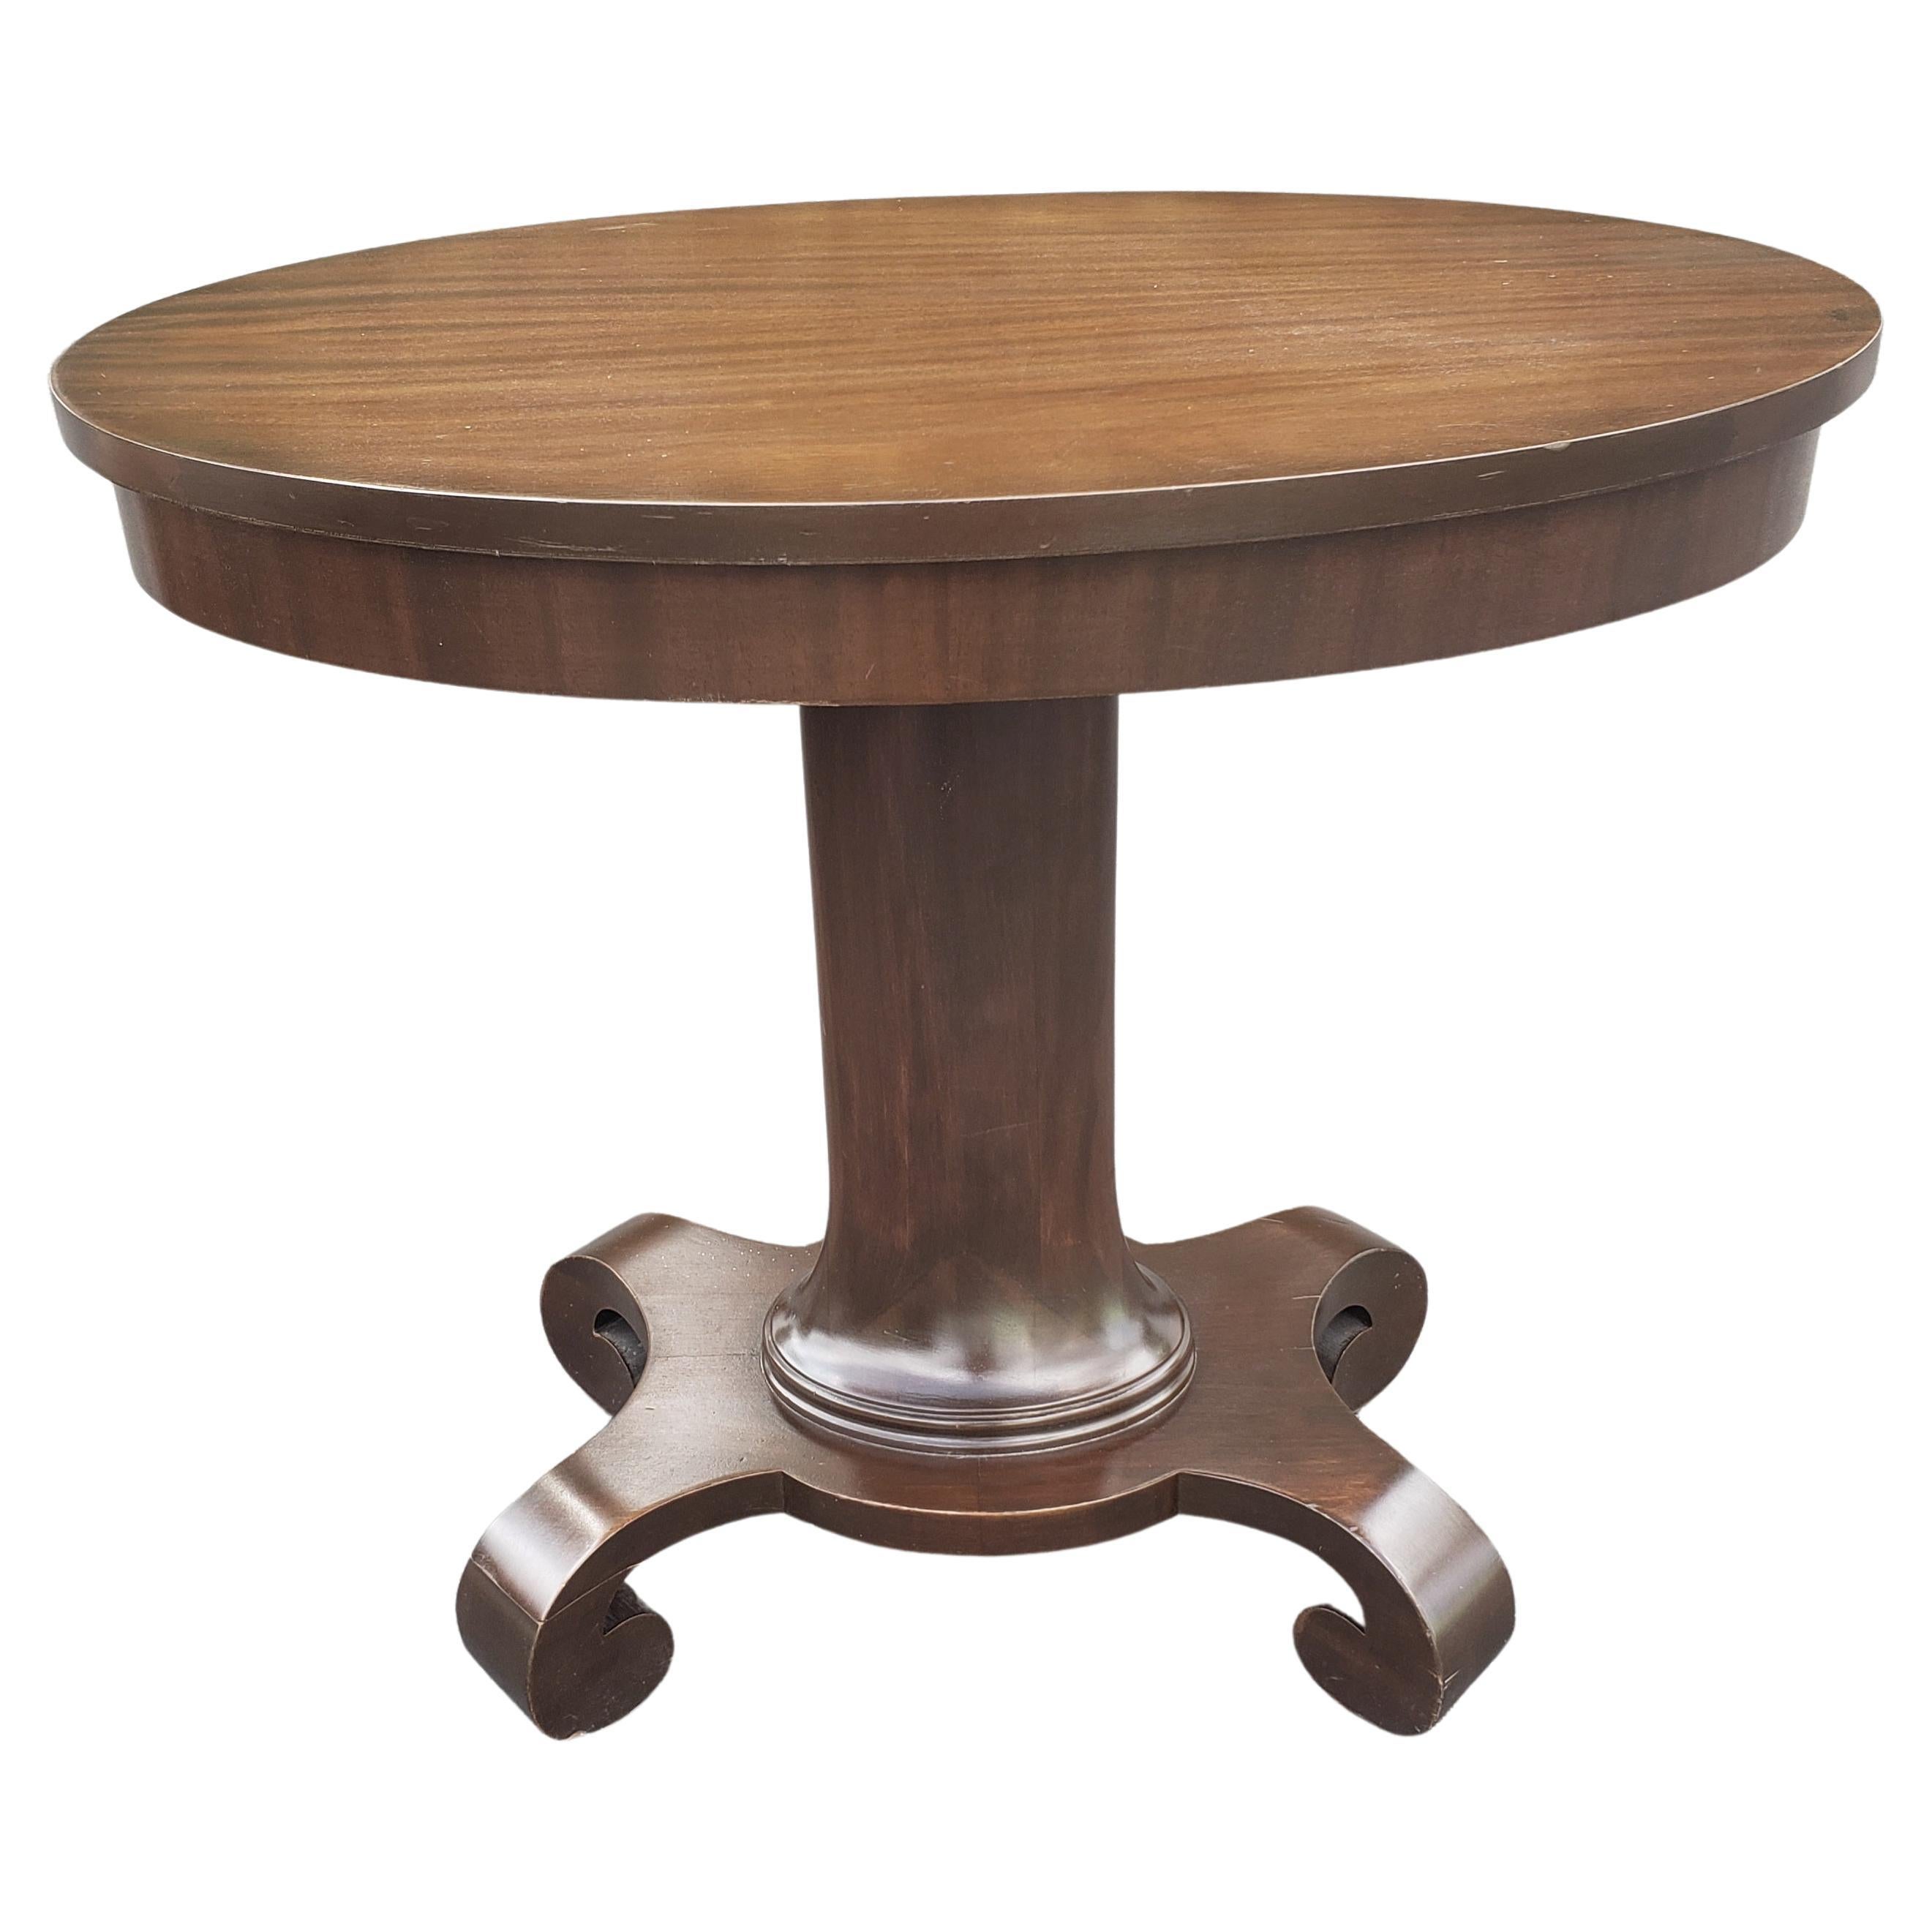 19th Century American Empire Refinished Oval Pedestal Mahogany Side Table  For Sale